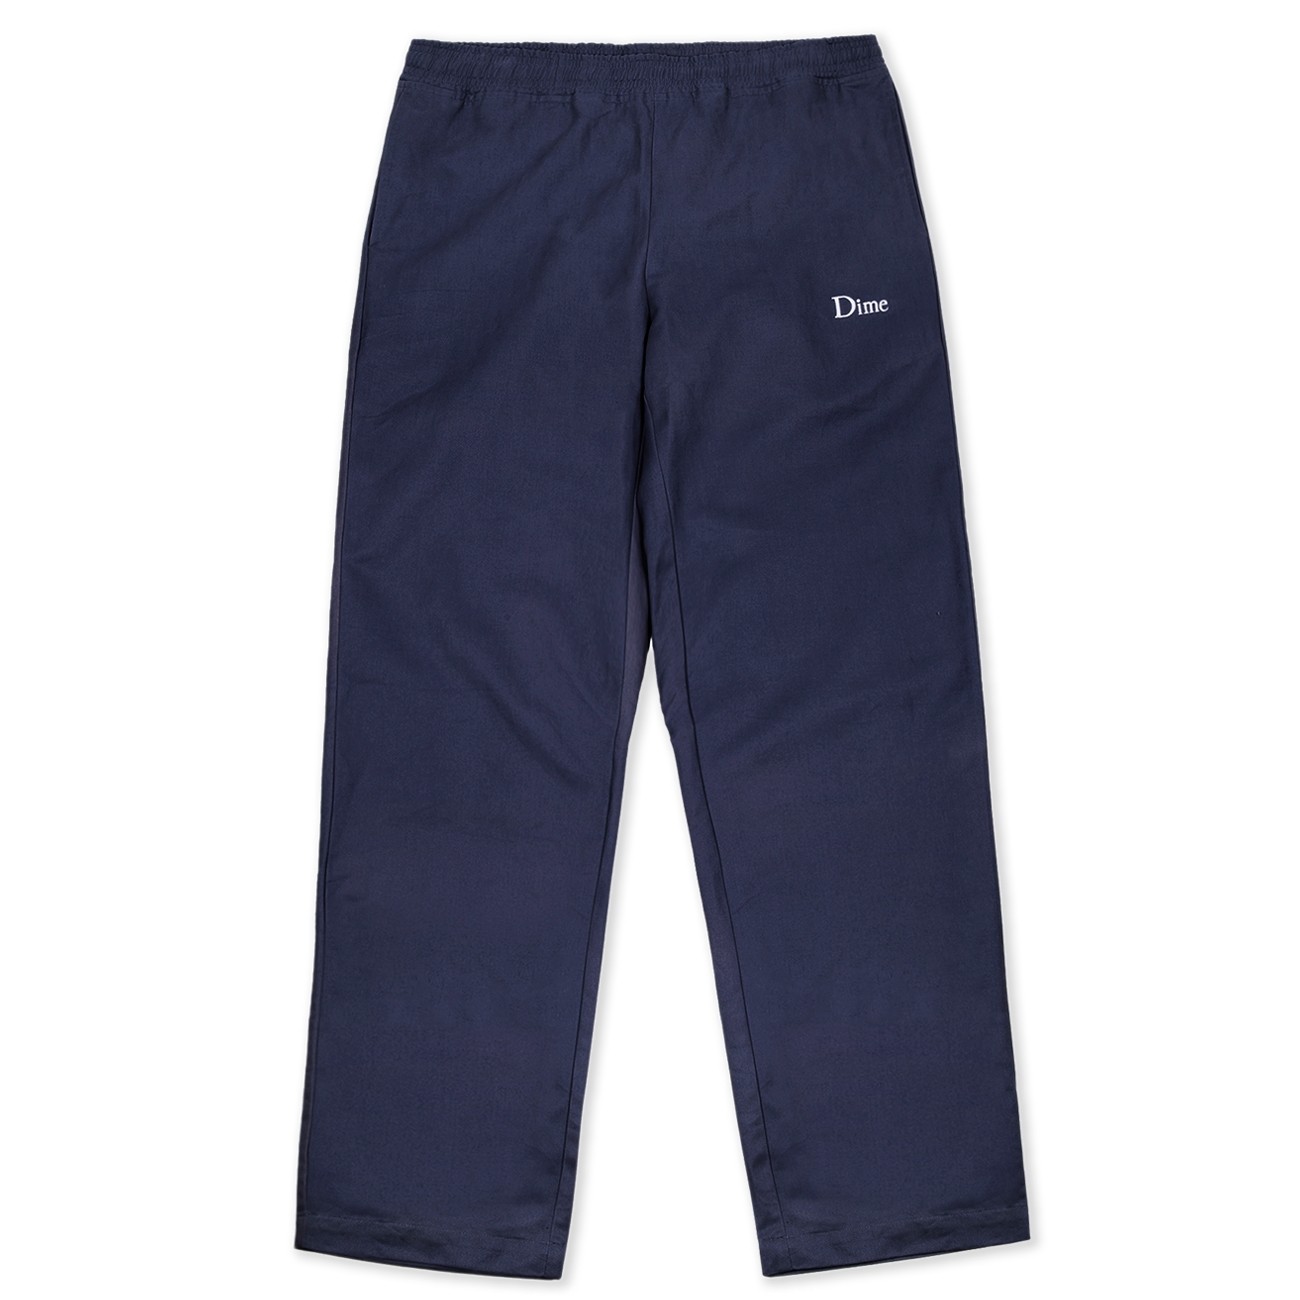 Dime Classic Twill Pants (Navy) - DIMES3041NVY - Consortium